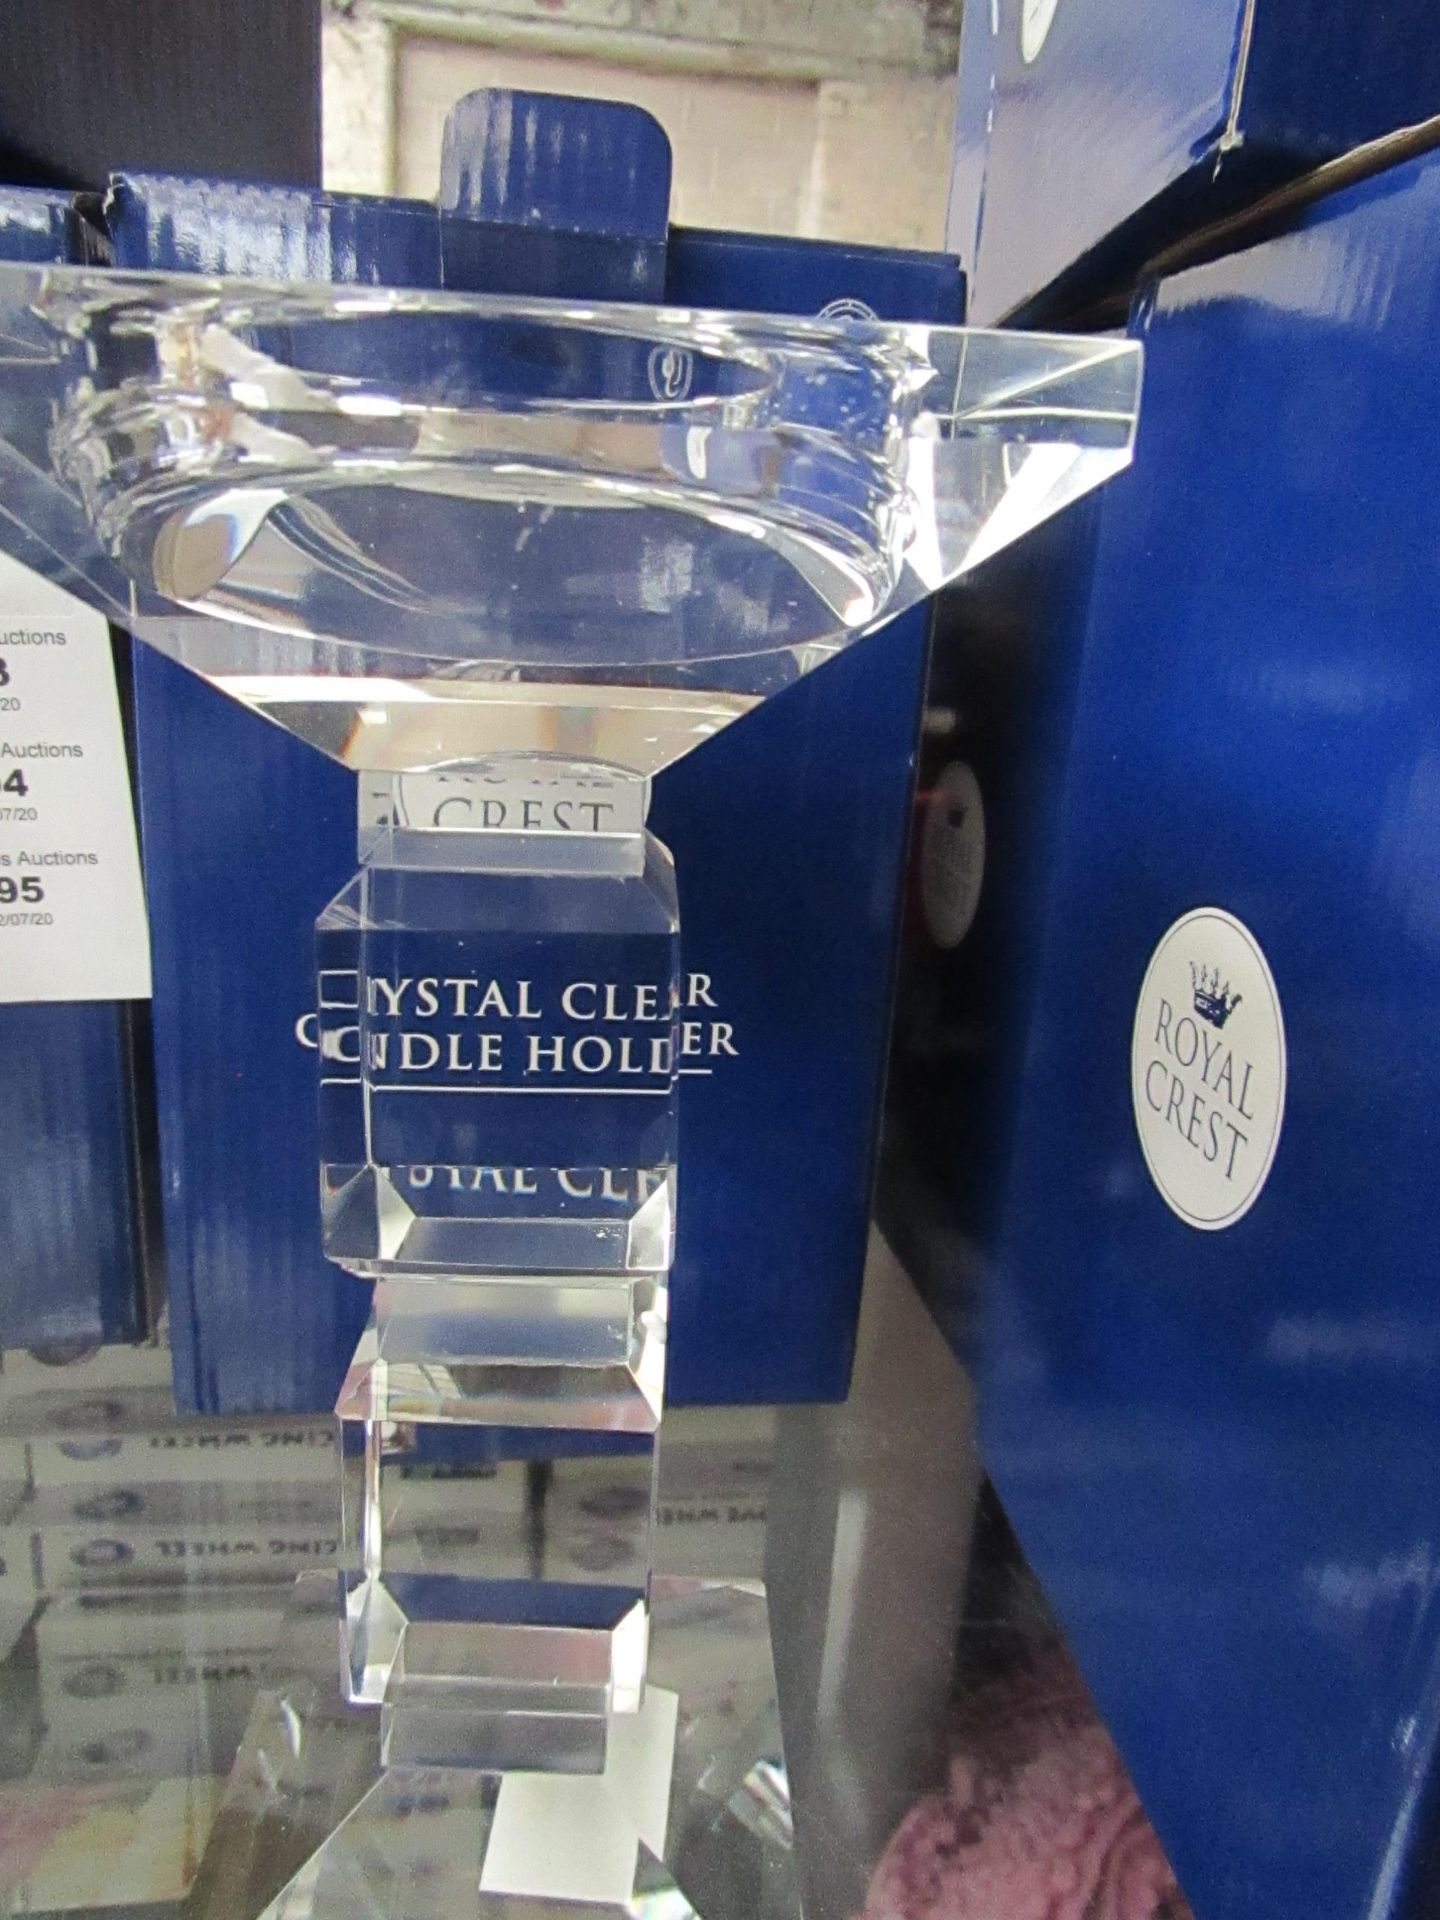 1 x Royal Crest Crystal Candle Holder  9" in height new & packaged